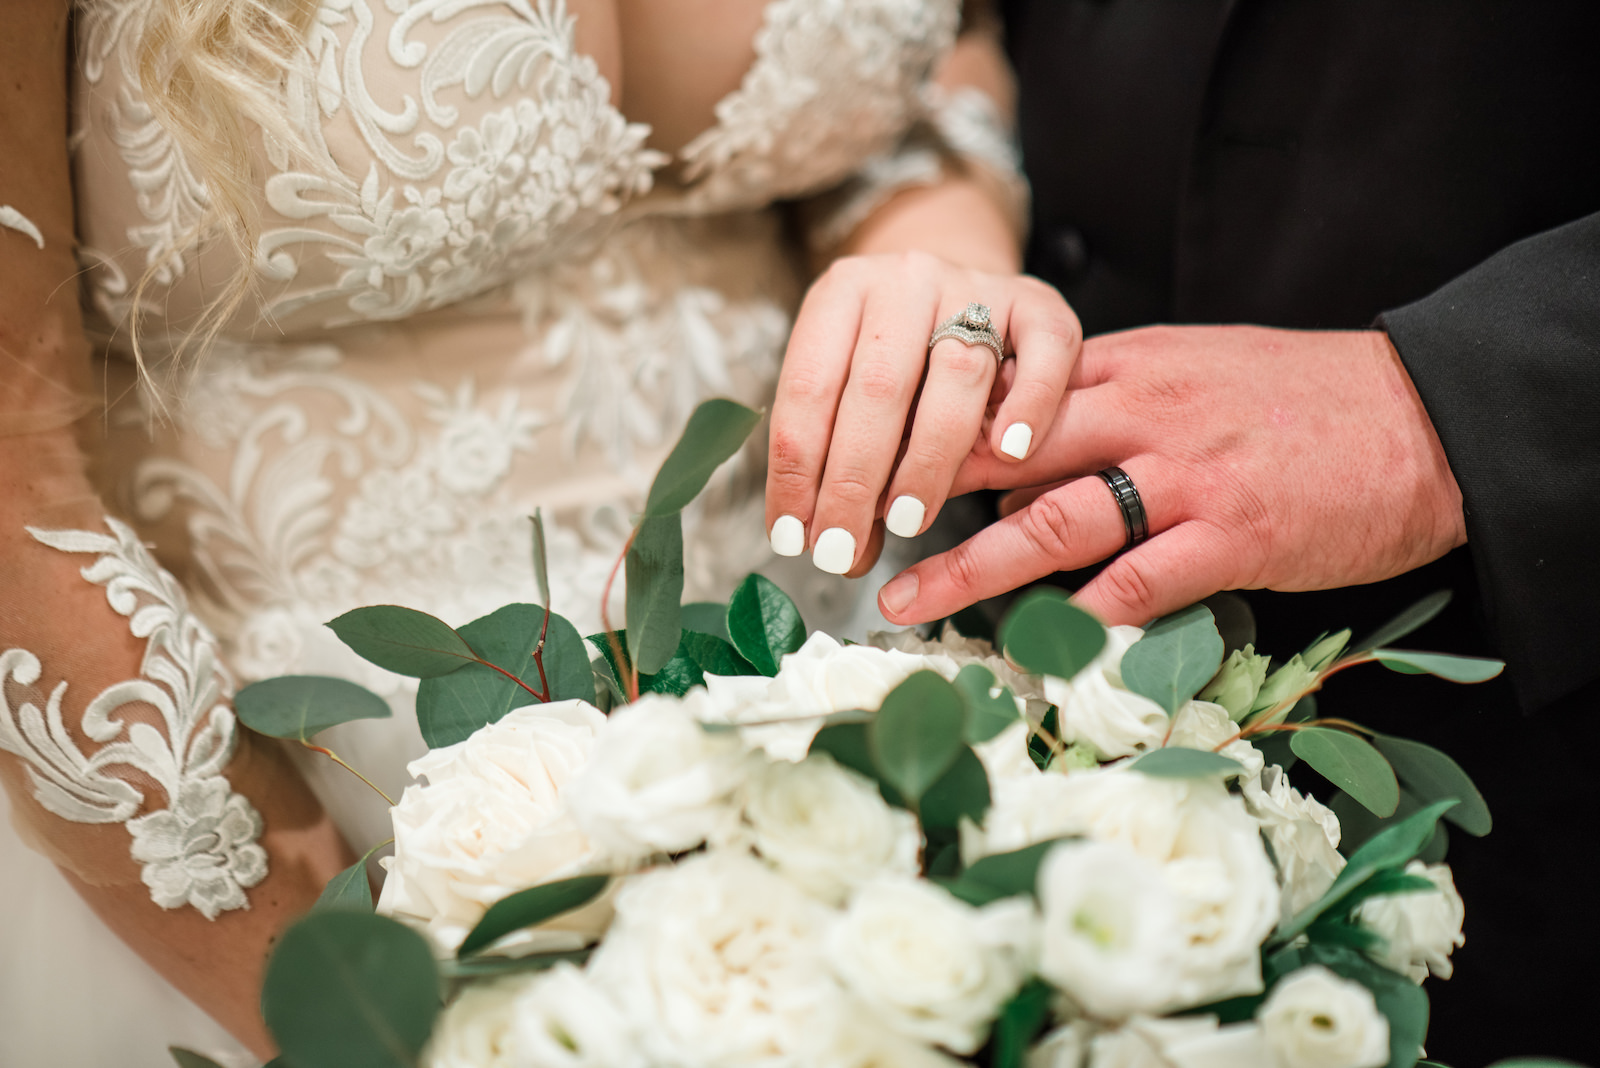 Tampa Bride and Groom Showing Off Hands with Wedding Rings, Neutral White Roses and Eucalyptus Floral Bouquet | Tampa Wedding Florist Iza's Flowers